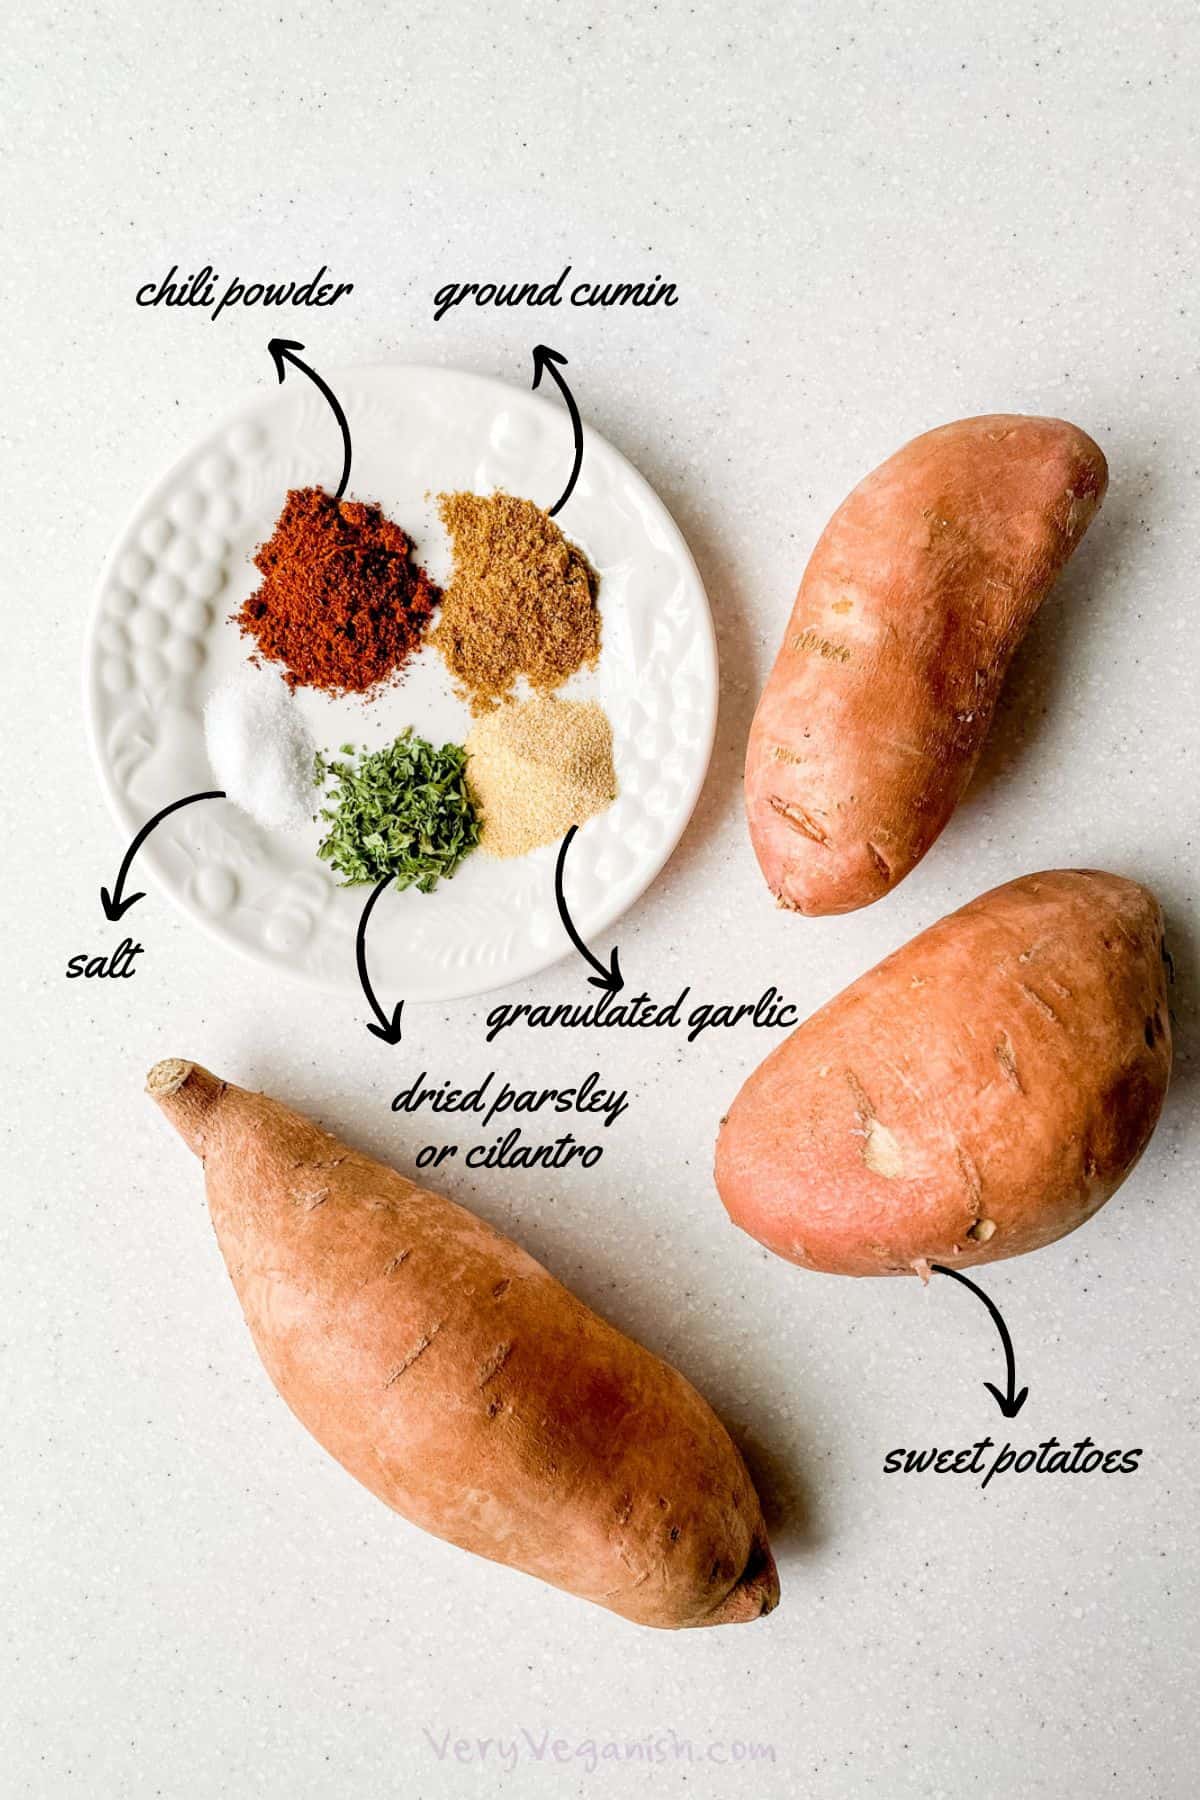 Ingredients laid out on counter: sweet potatoes, chili powder, ground cumin, granulated garlic, dried parsley and salt